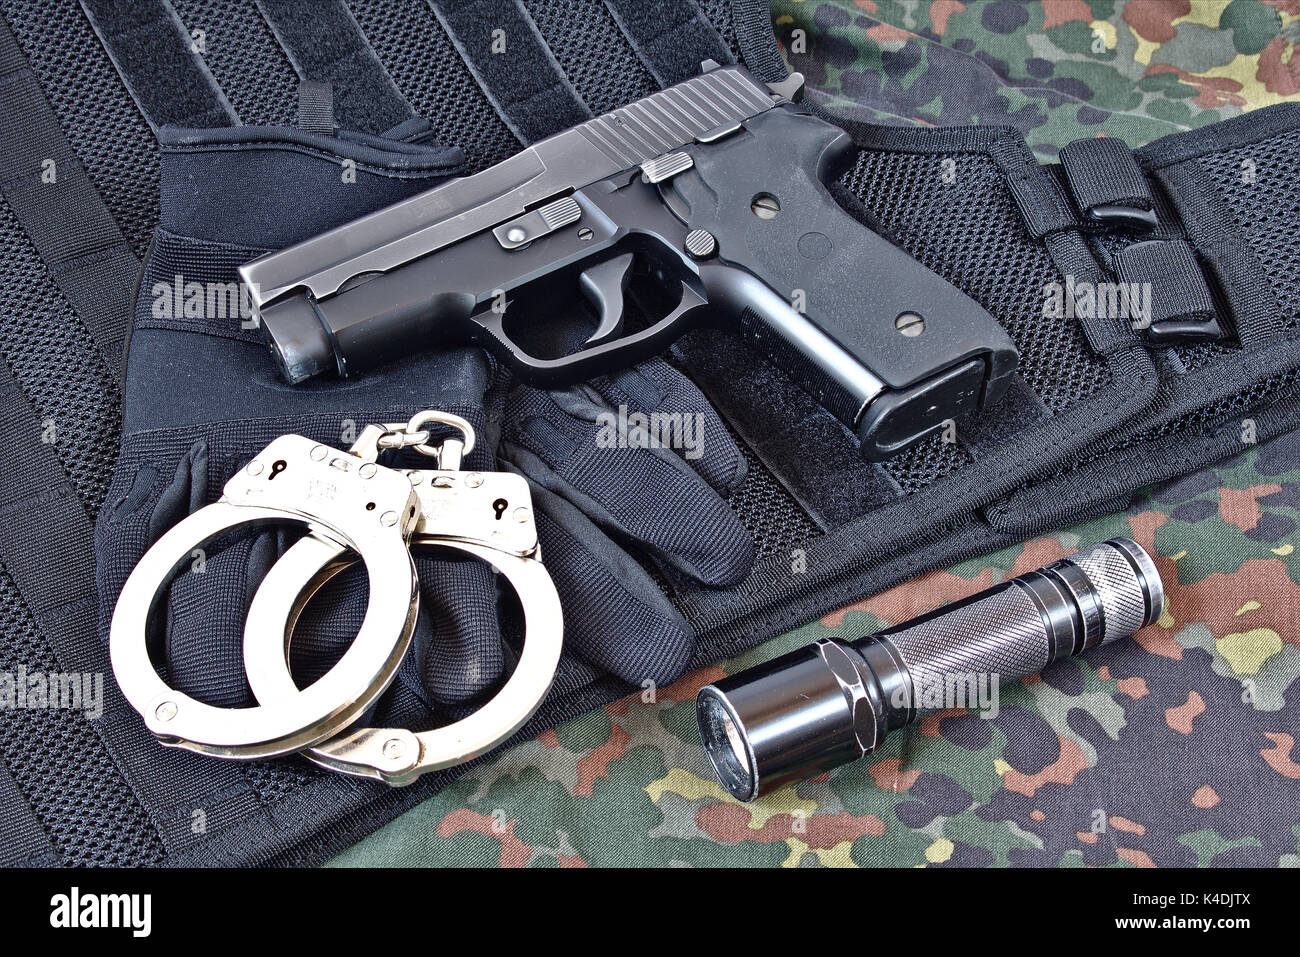 Handgun with handcuffs, gloves and flashlight on black tactical vest and camouflage clothing Stock Photo